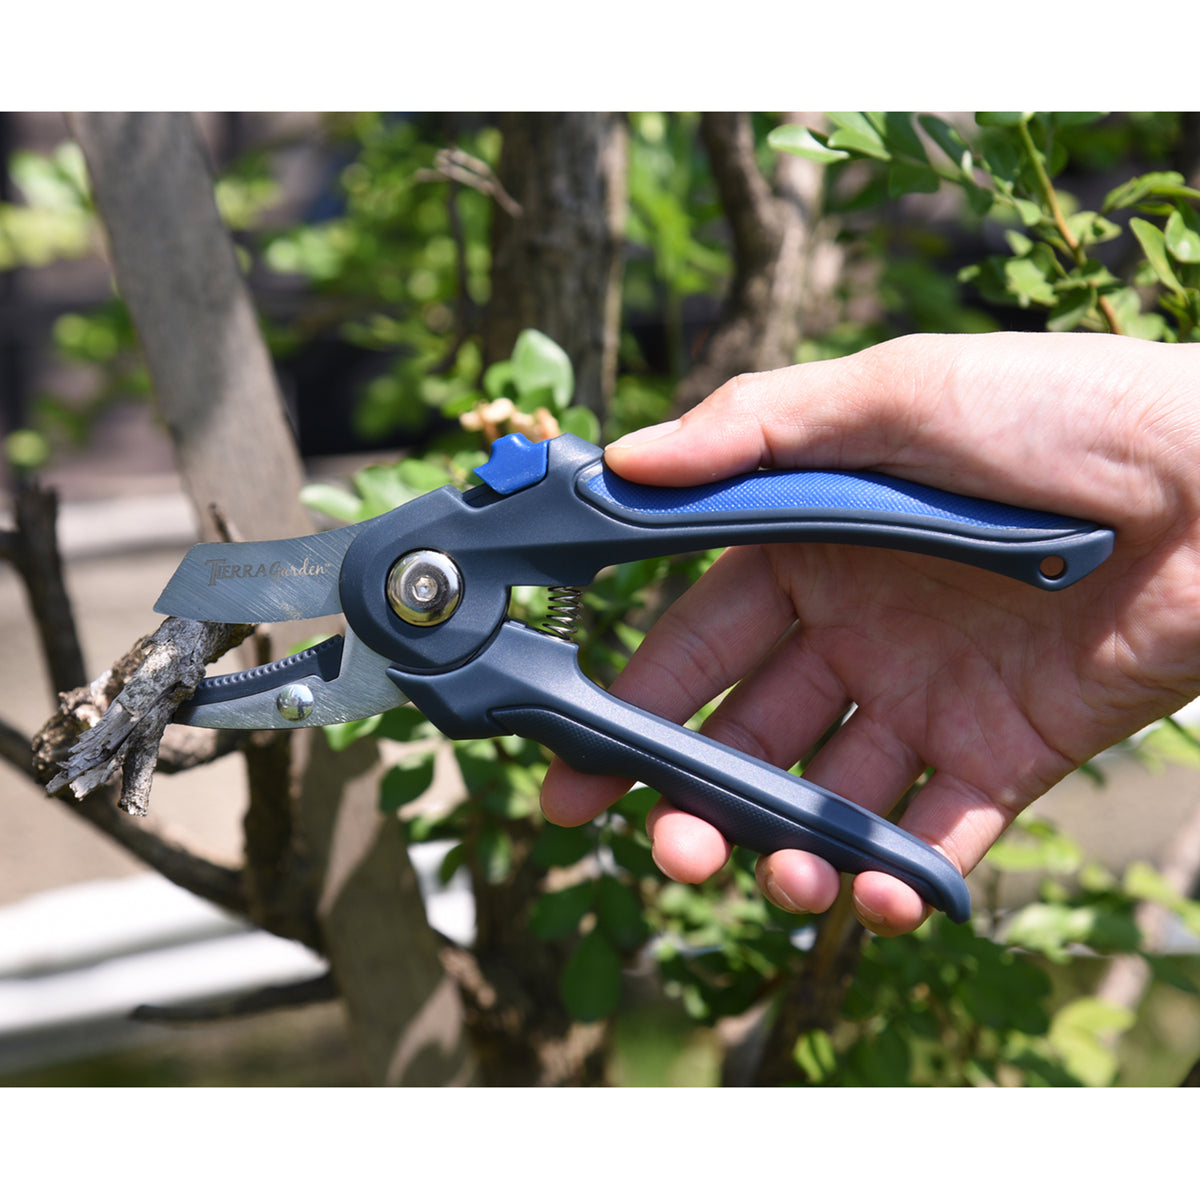 Stainless Steel Anvil Pruner with TRP Handle